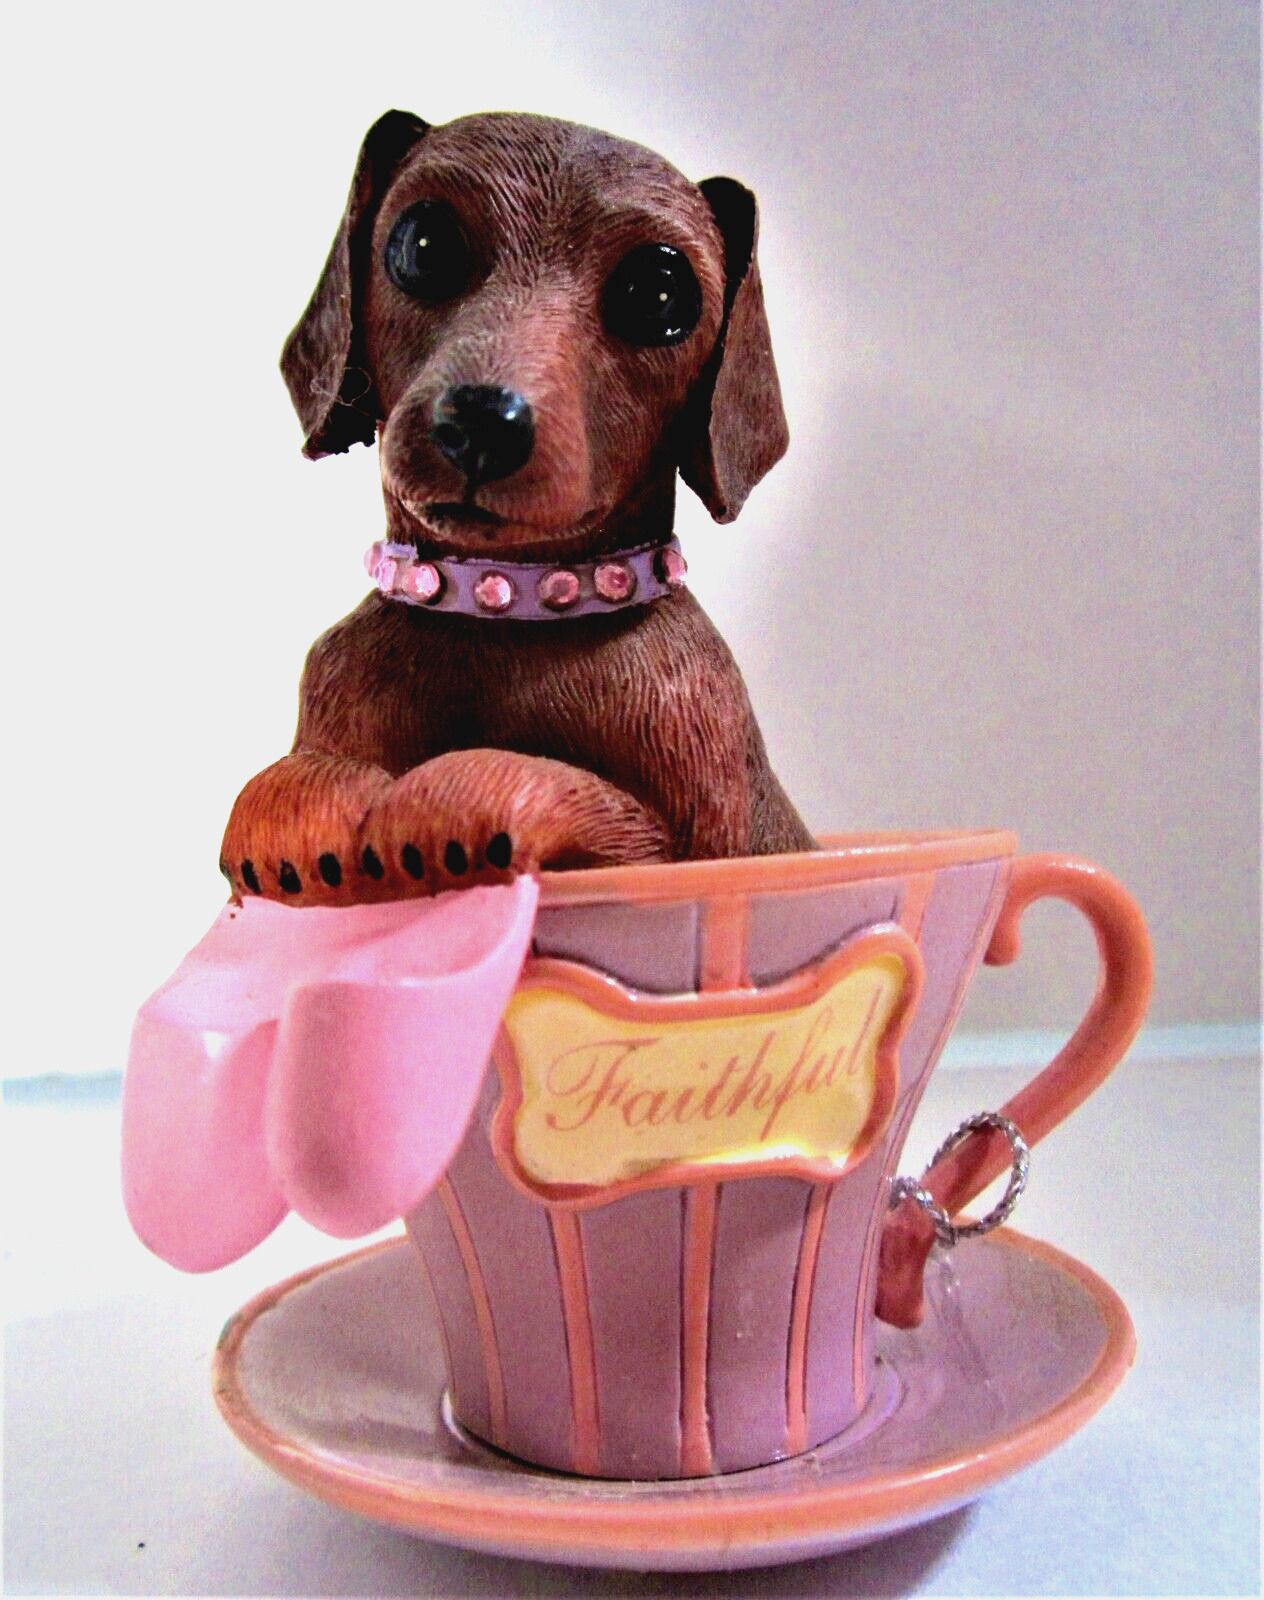 Hamilton Collection Dachshunds with Personali-Tea \